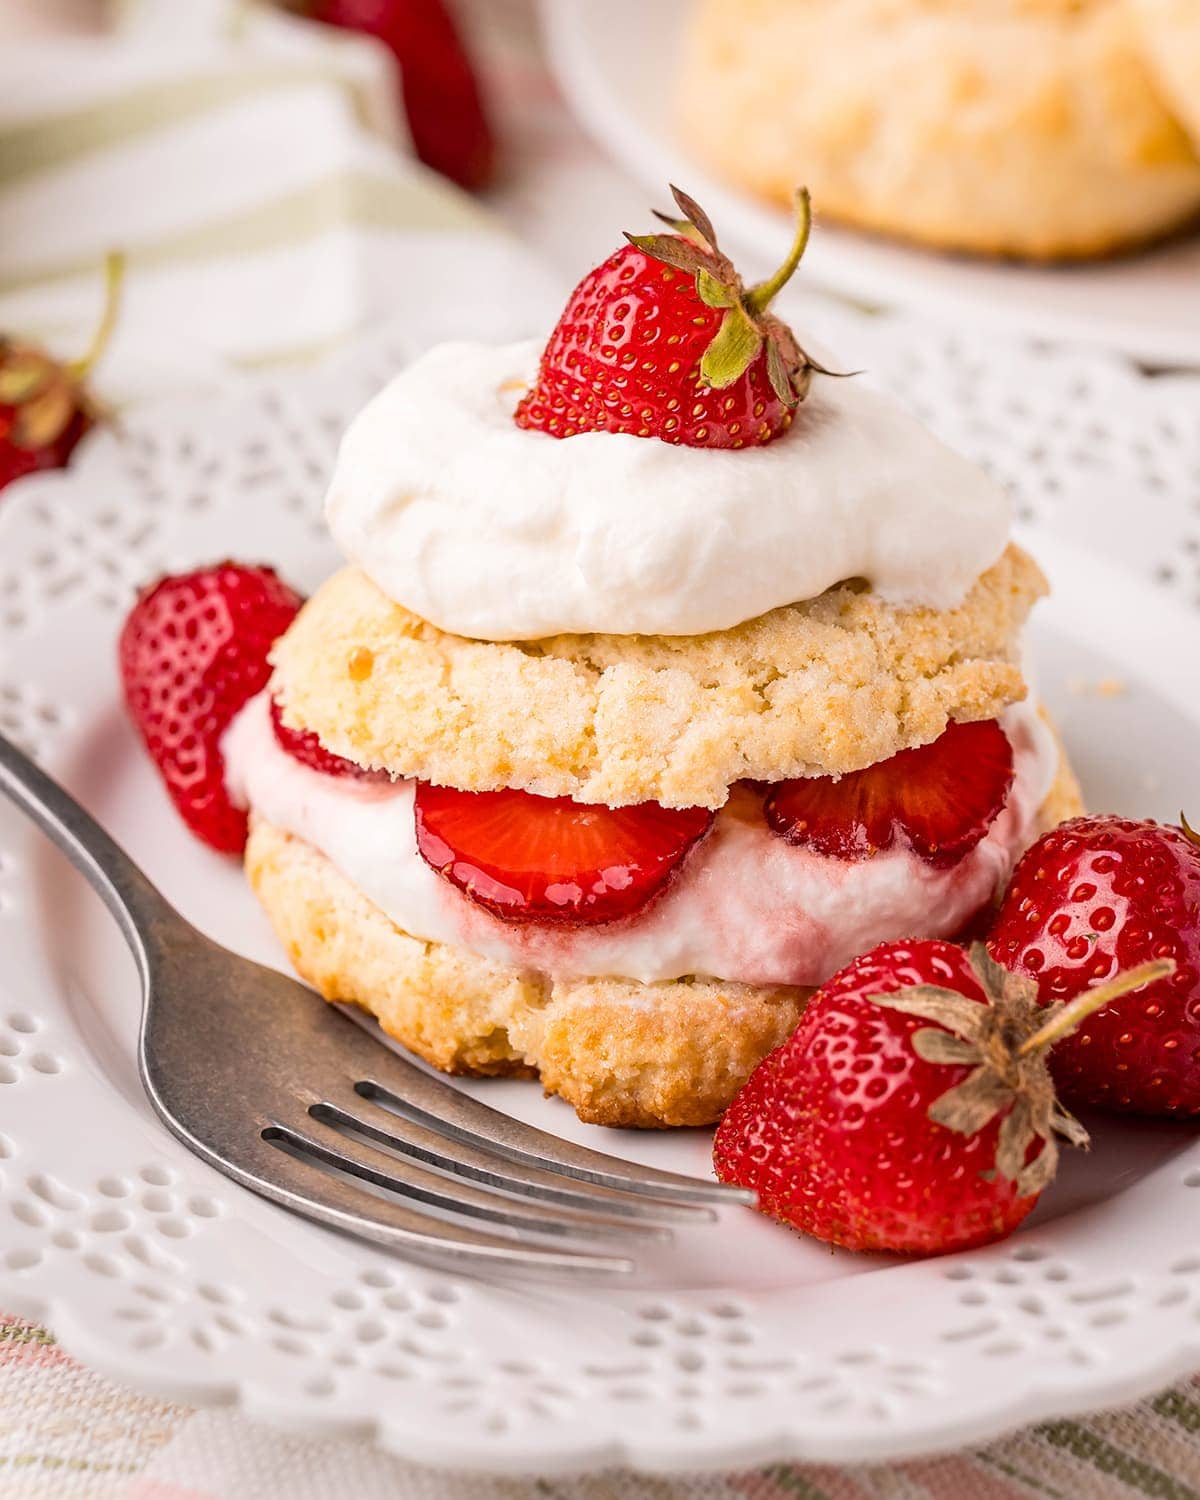 Strawberry shortcakes on a plate with layers of whipped cream and strawberries.